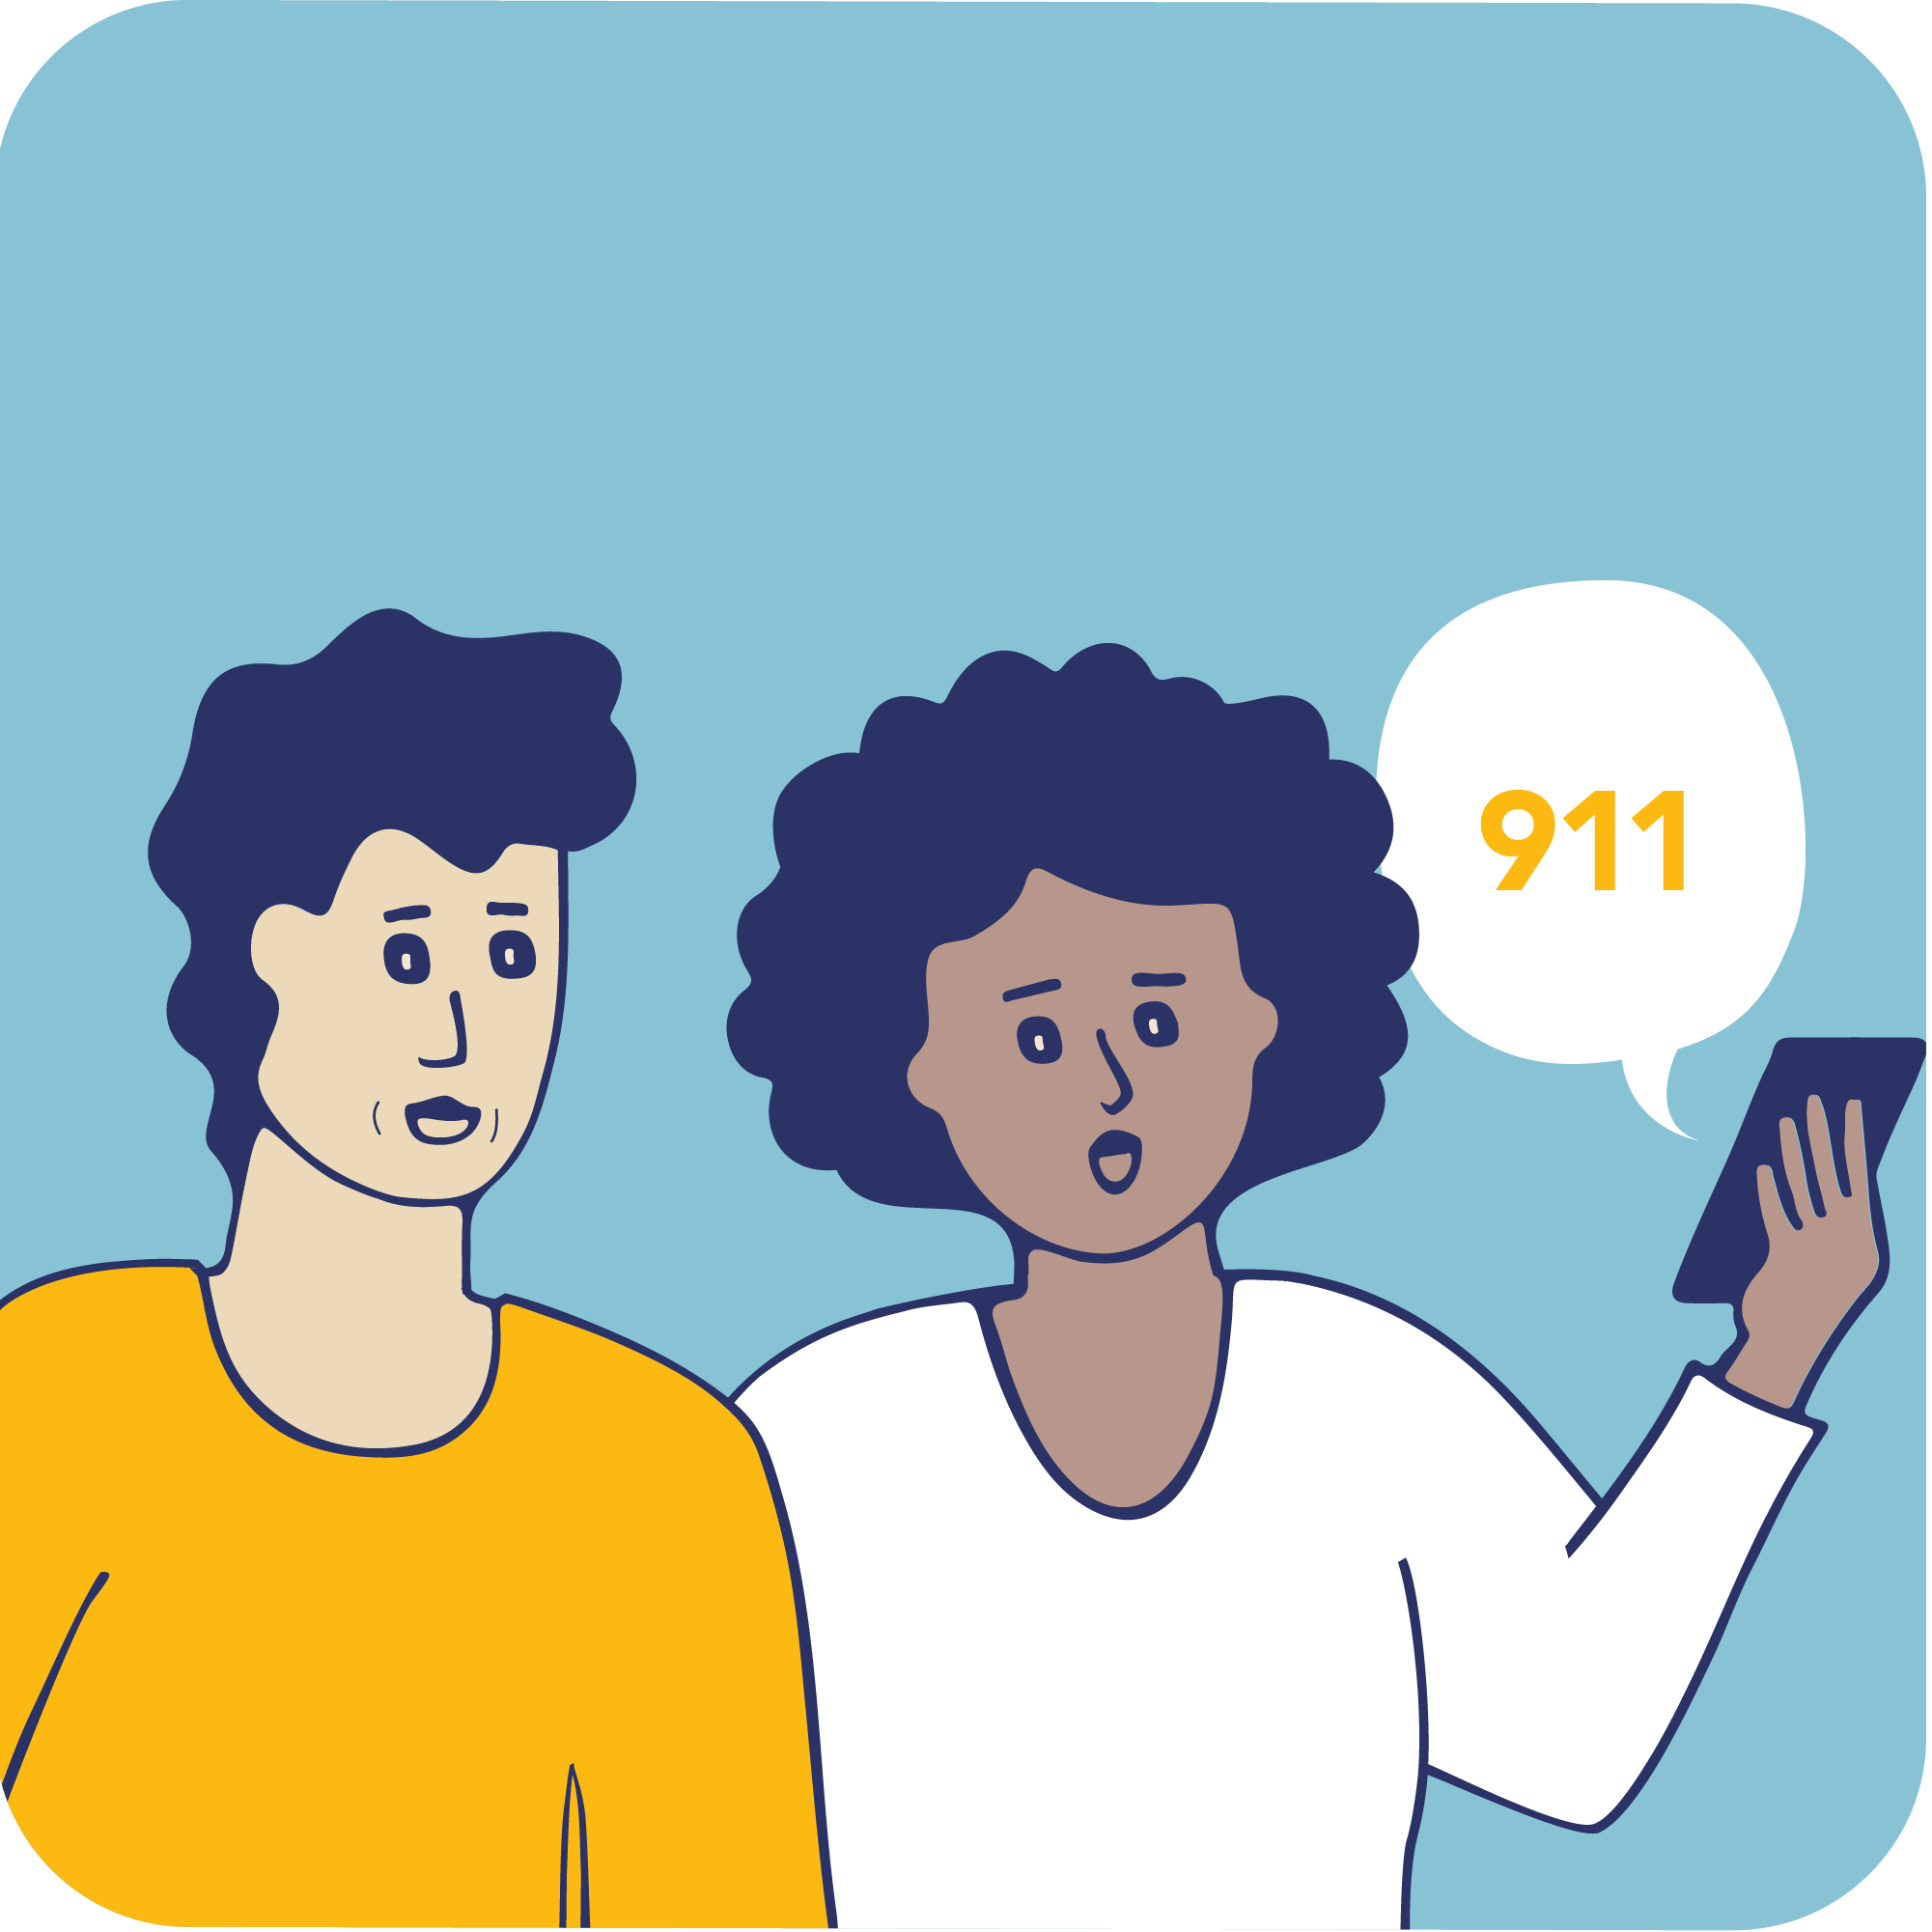 Two people calling 911